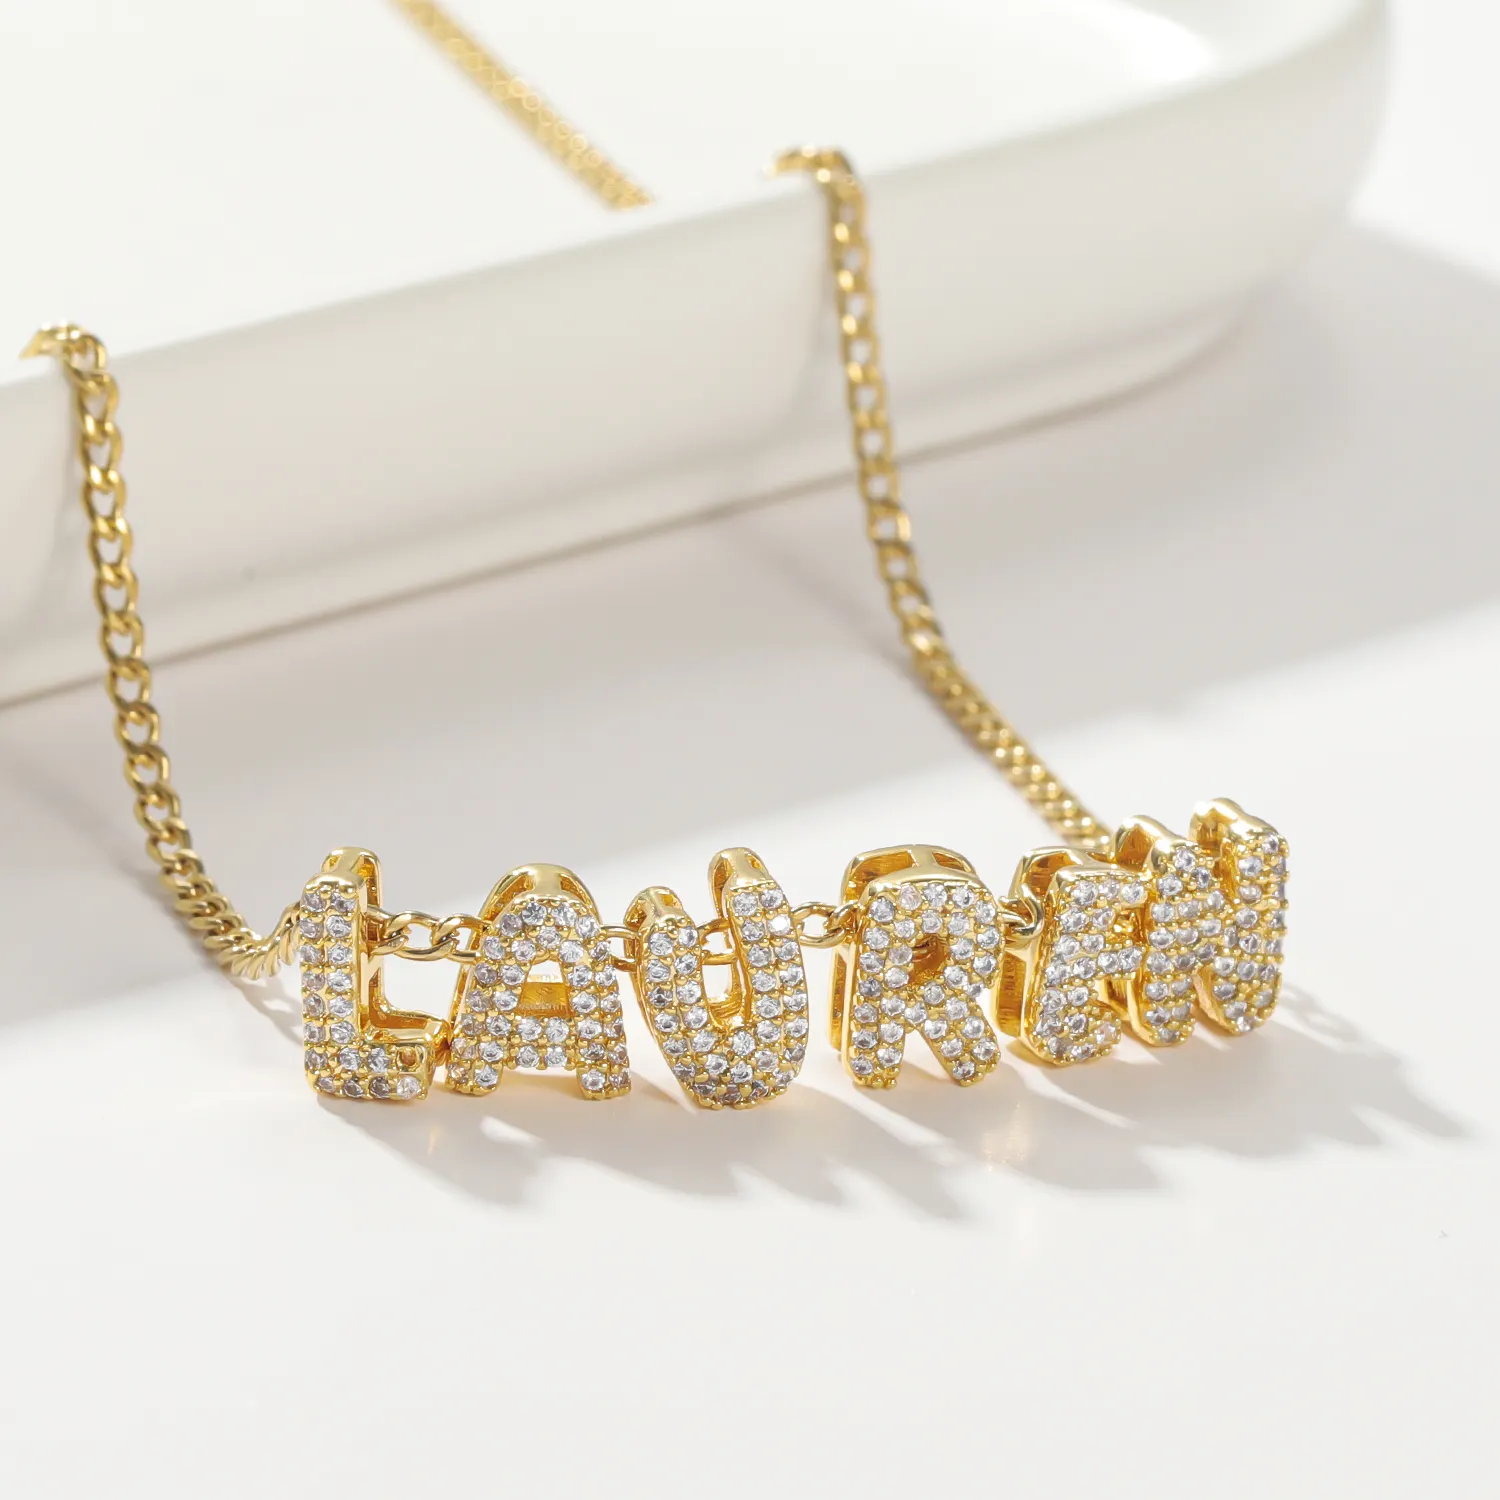 3D Bubble Name Necklace Gold Diamond Name Pendant Balloon Letter Necklace Initial Puff Pendant Valentine's Day Gift For Her